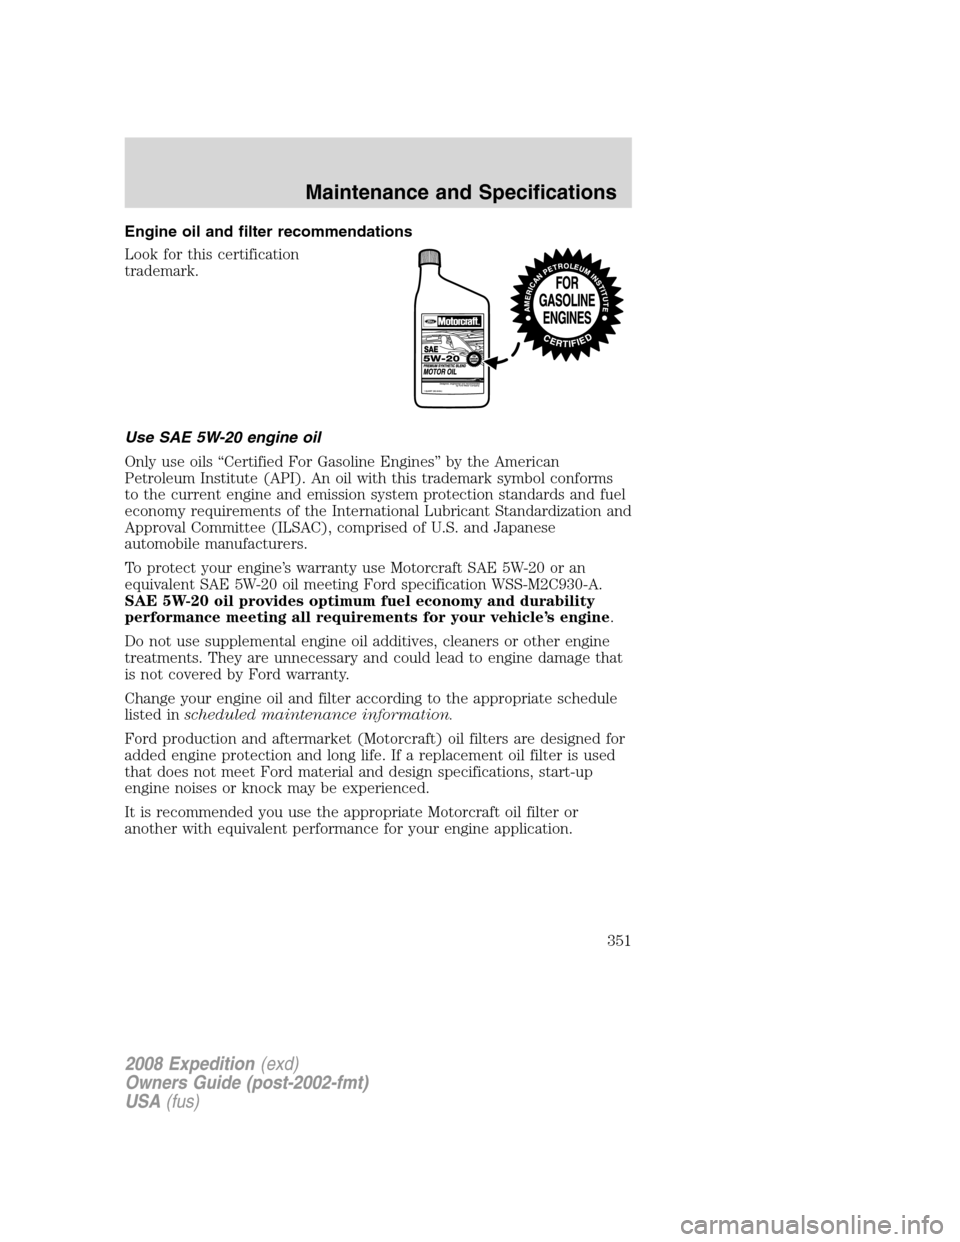 FORD EXPEDITION 2008 3.G Owners Manual Engine oil and filter recommendations
Look for this certification
trademark.
Use SAE 5W-20 engine oil
Only use oils “Certified For Gasoline Engines” by the American
Petroleum Institute (API). An o